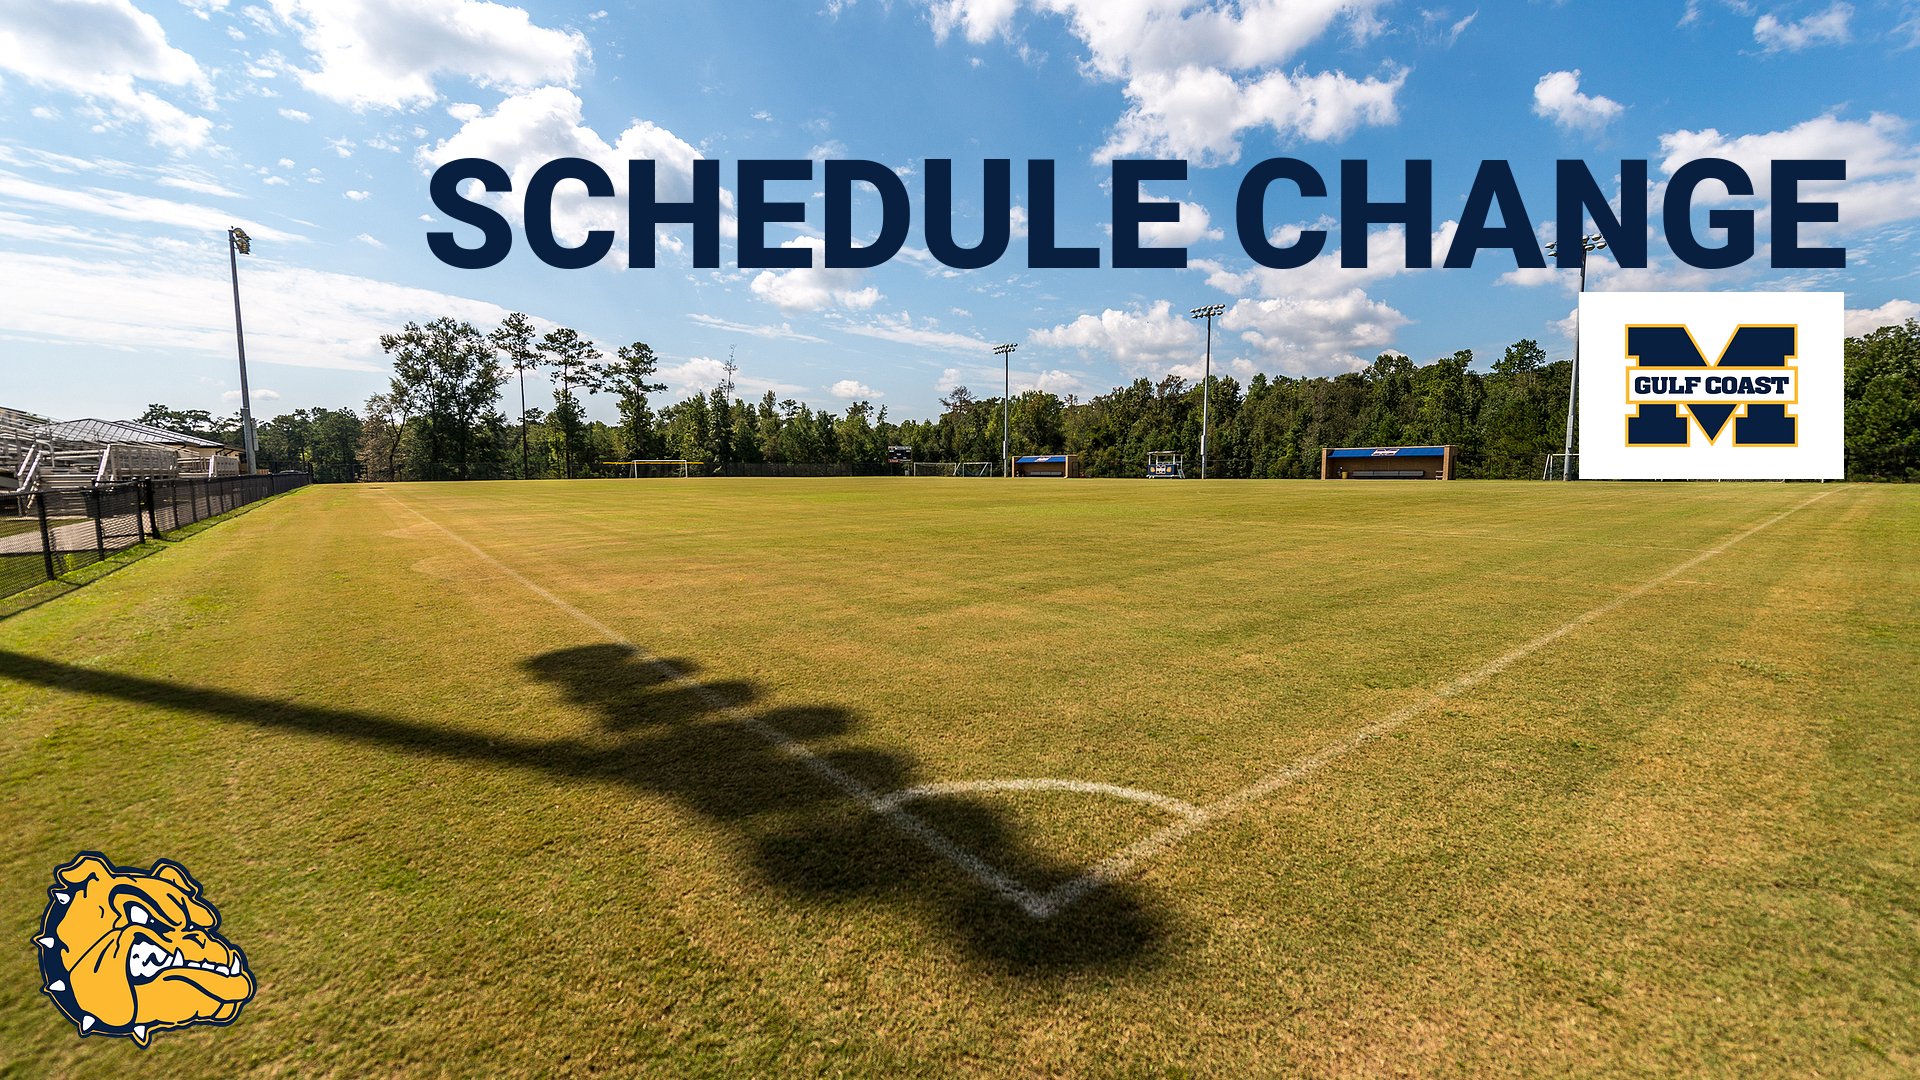 Soccer games moved to Wednesday